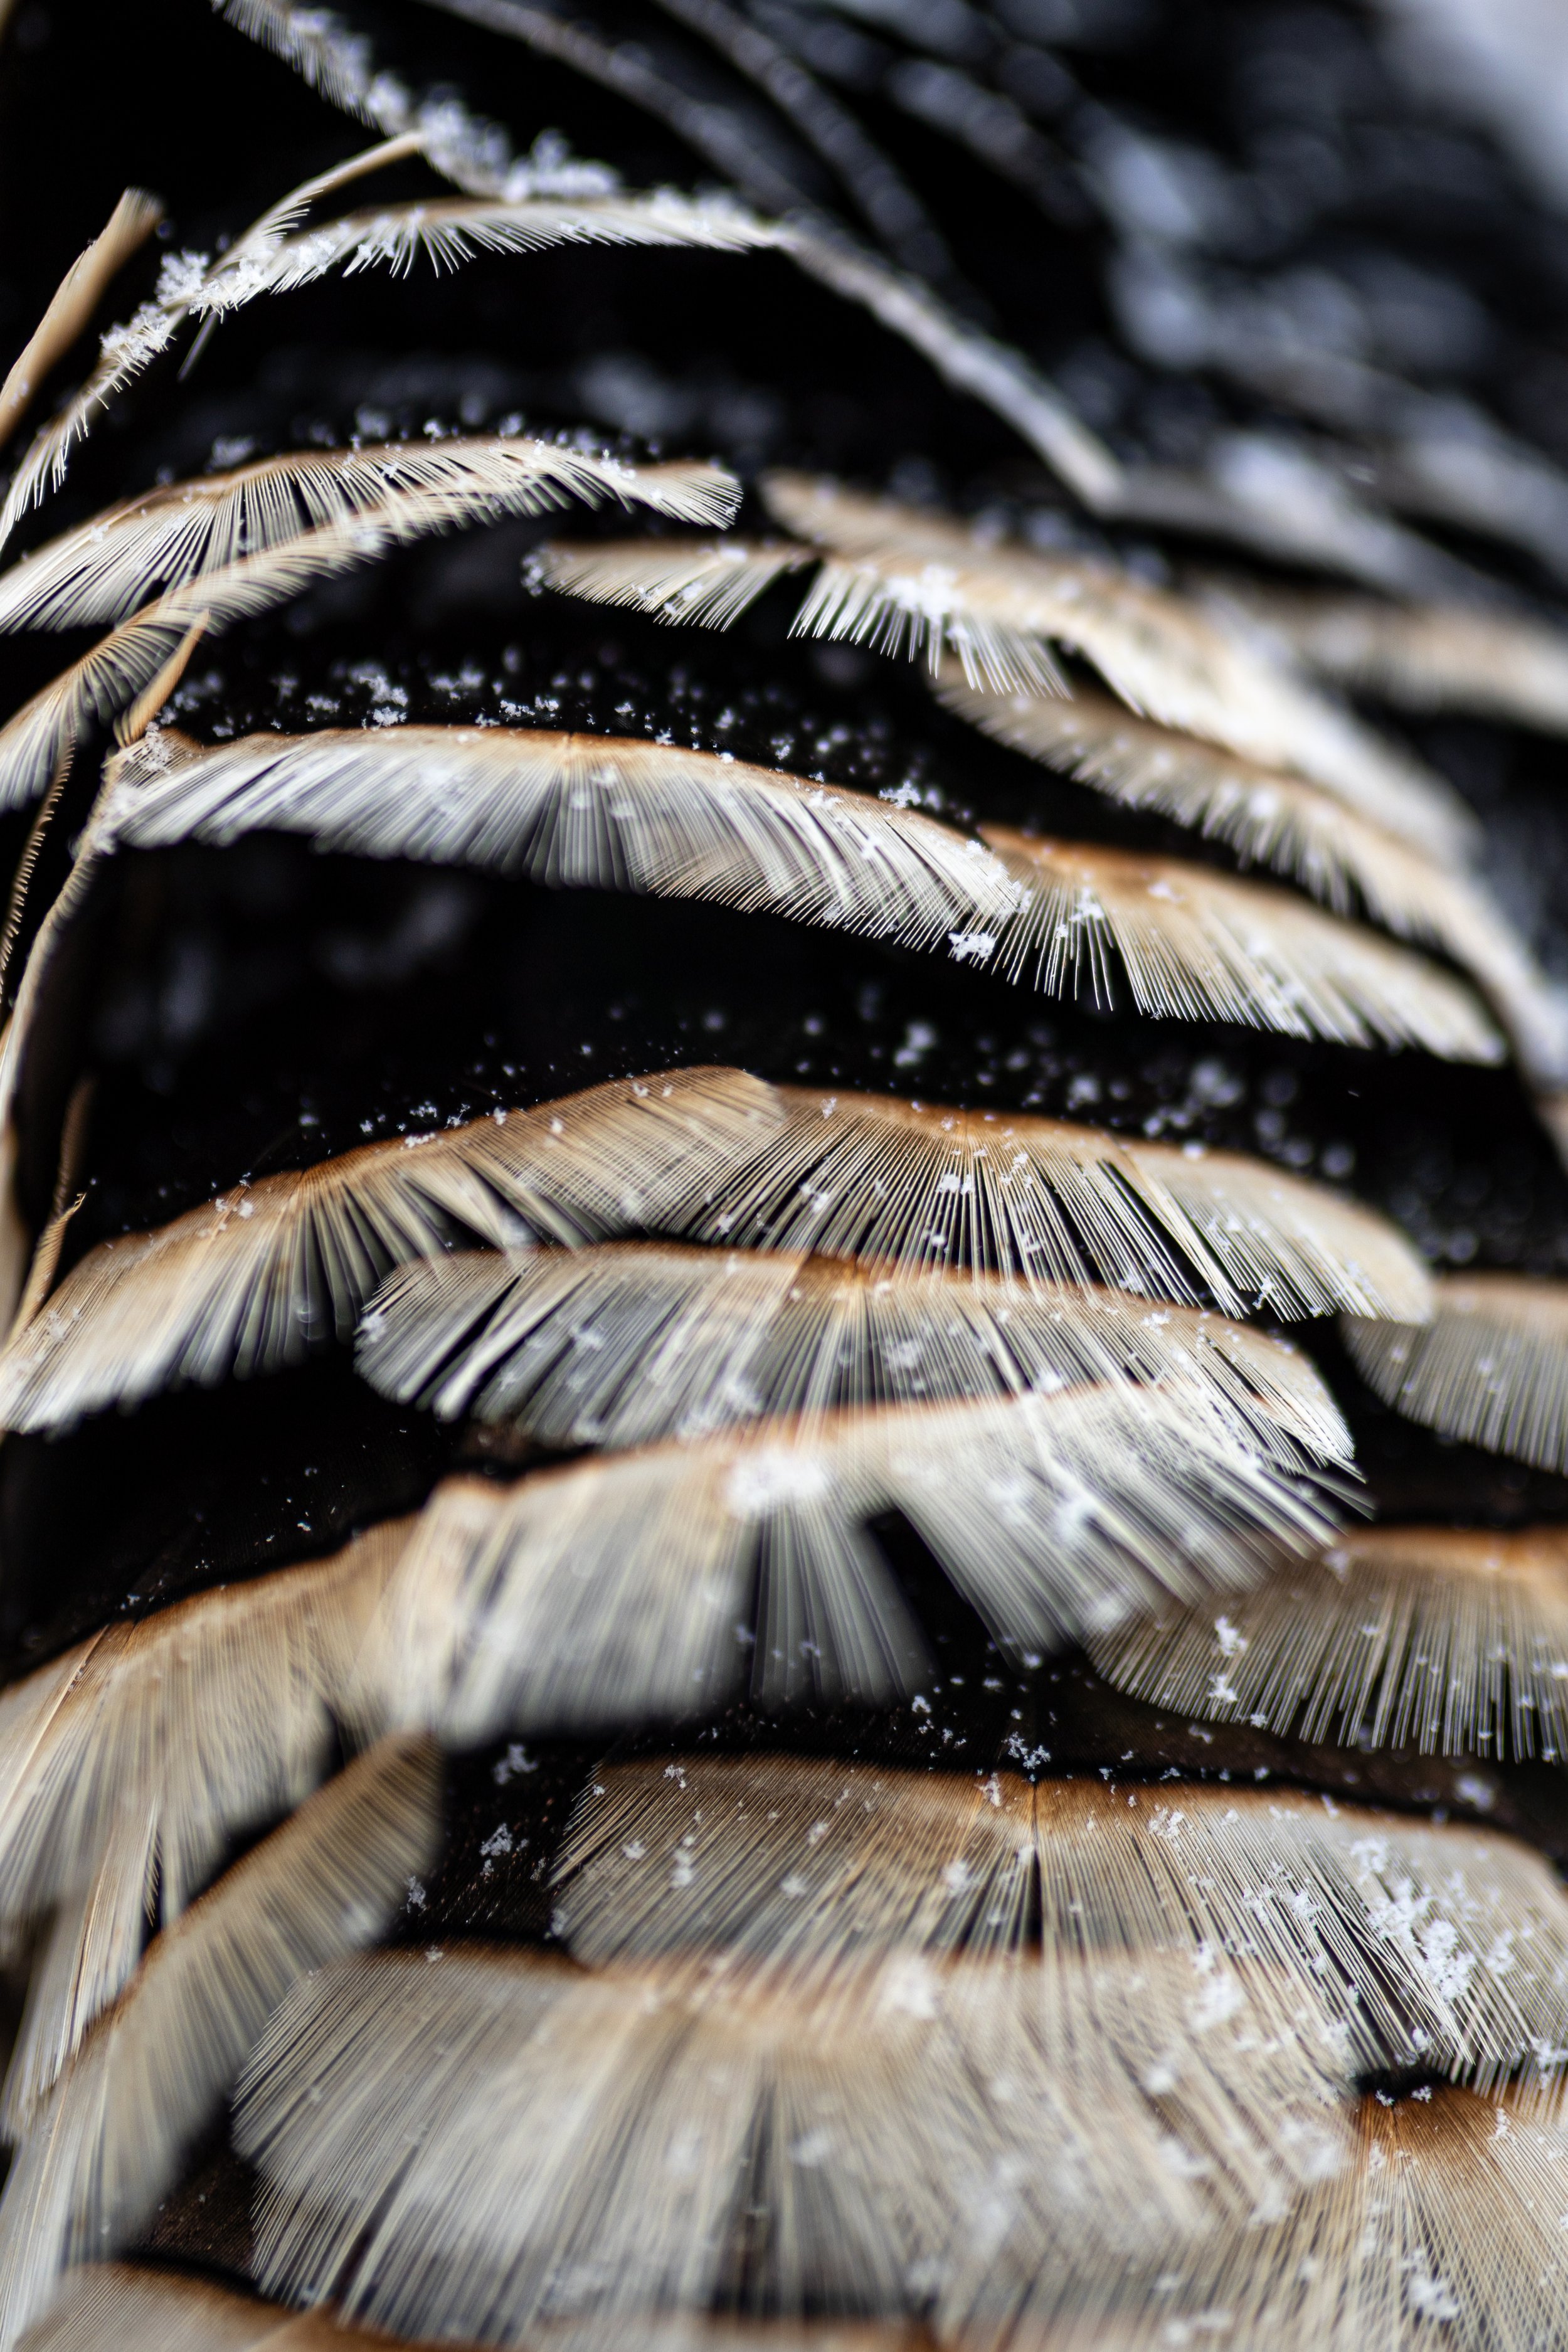 Turkey feathers with a dusting of snow on them